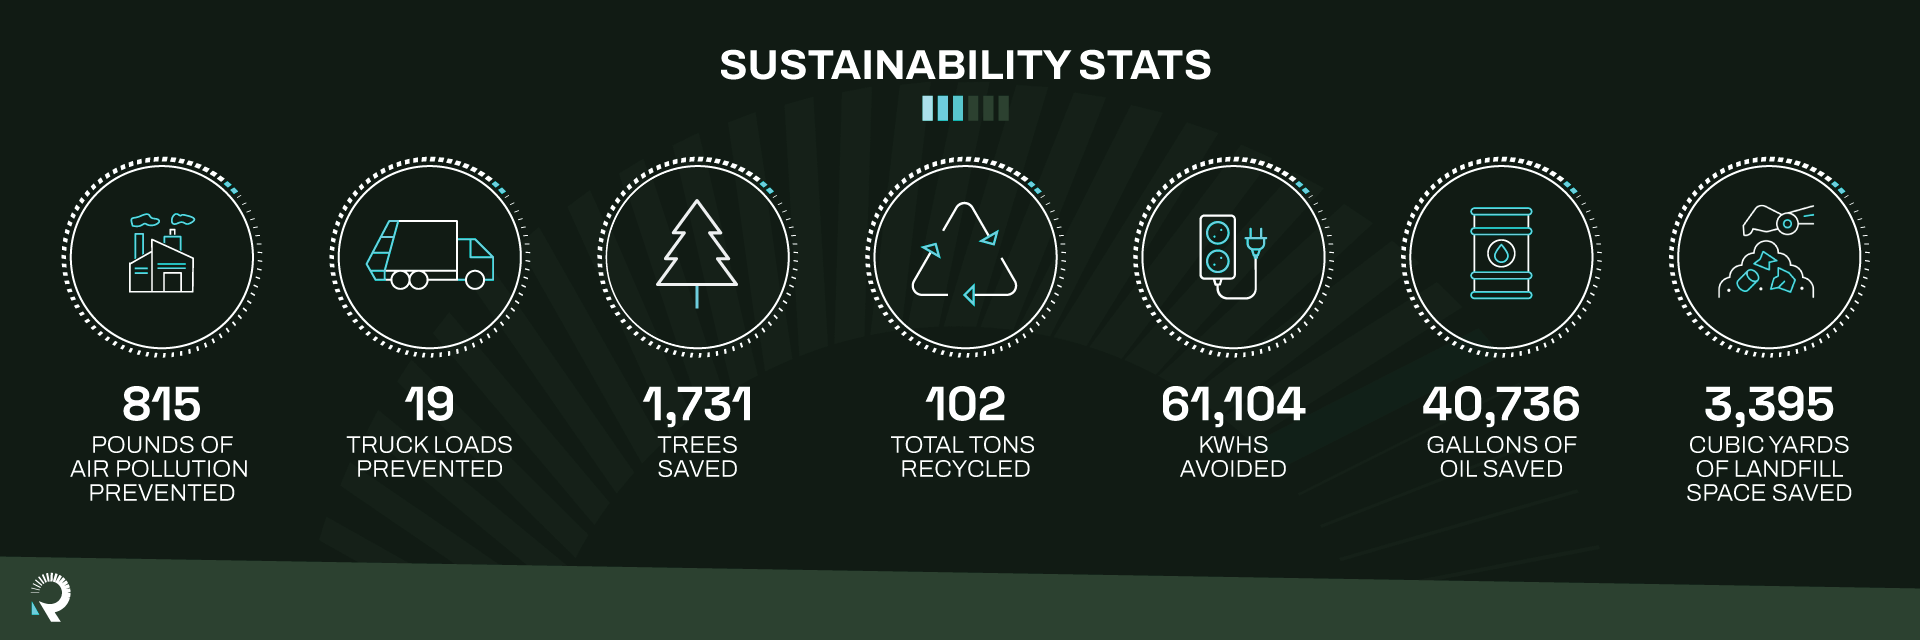 infographic of statistics sustainability saved by Brookfield Properties and RoadRunner's partnership.